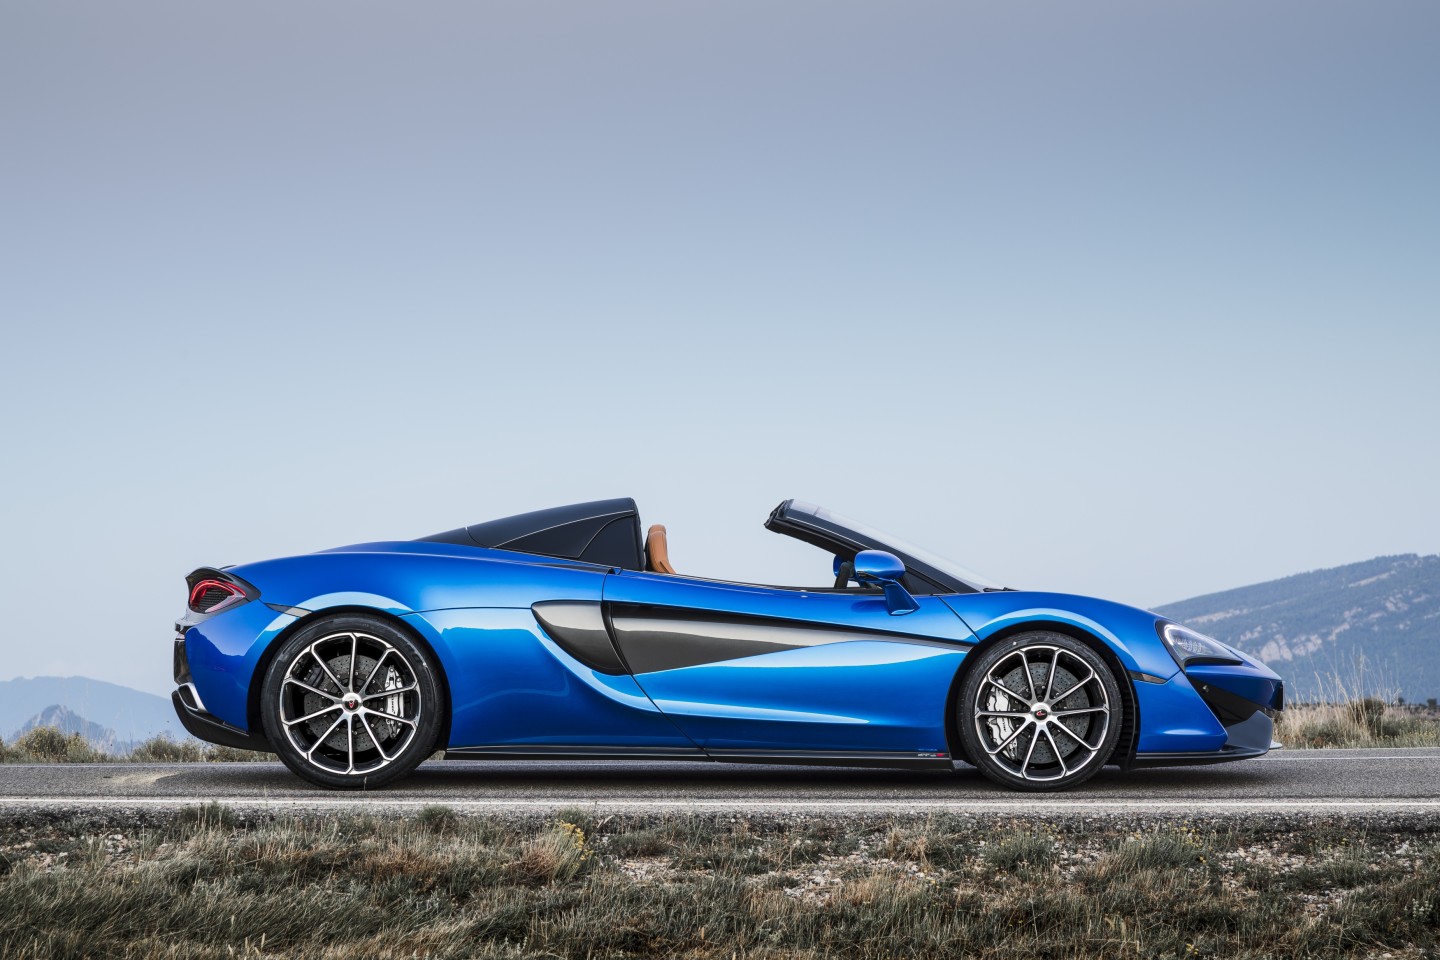 From profile, the 570S is unmistakably McLaren